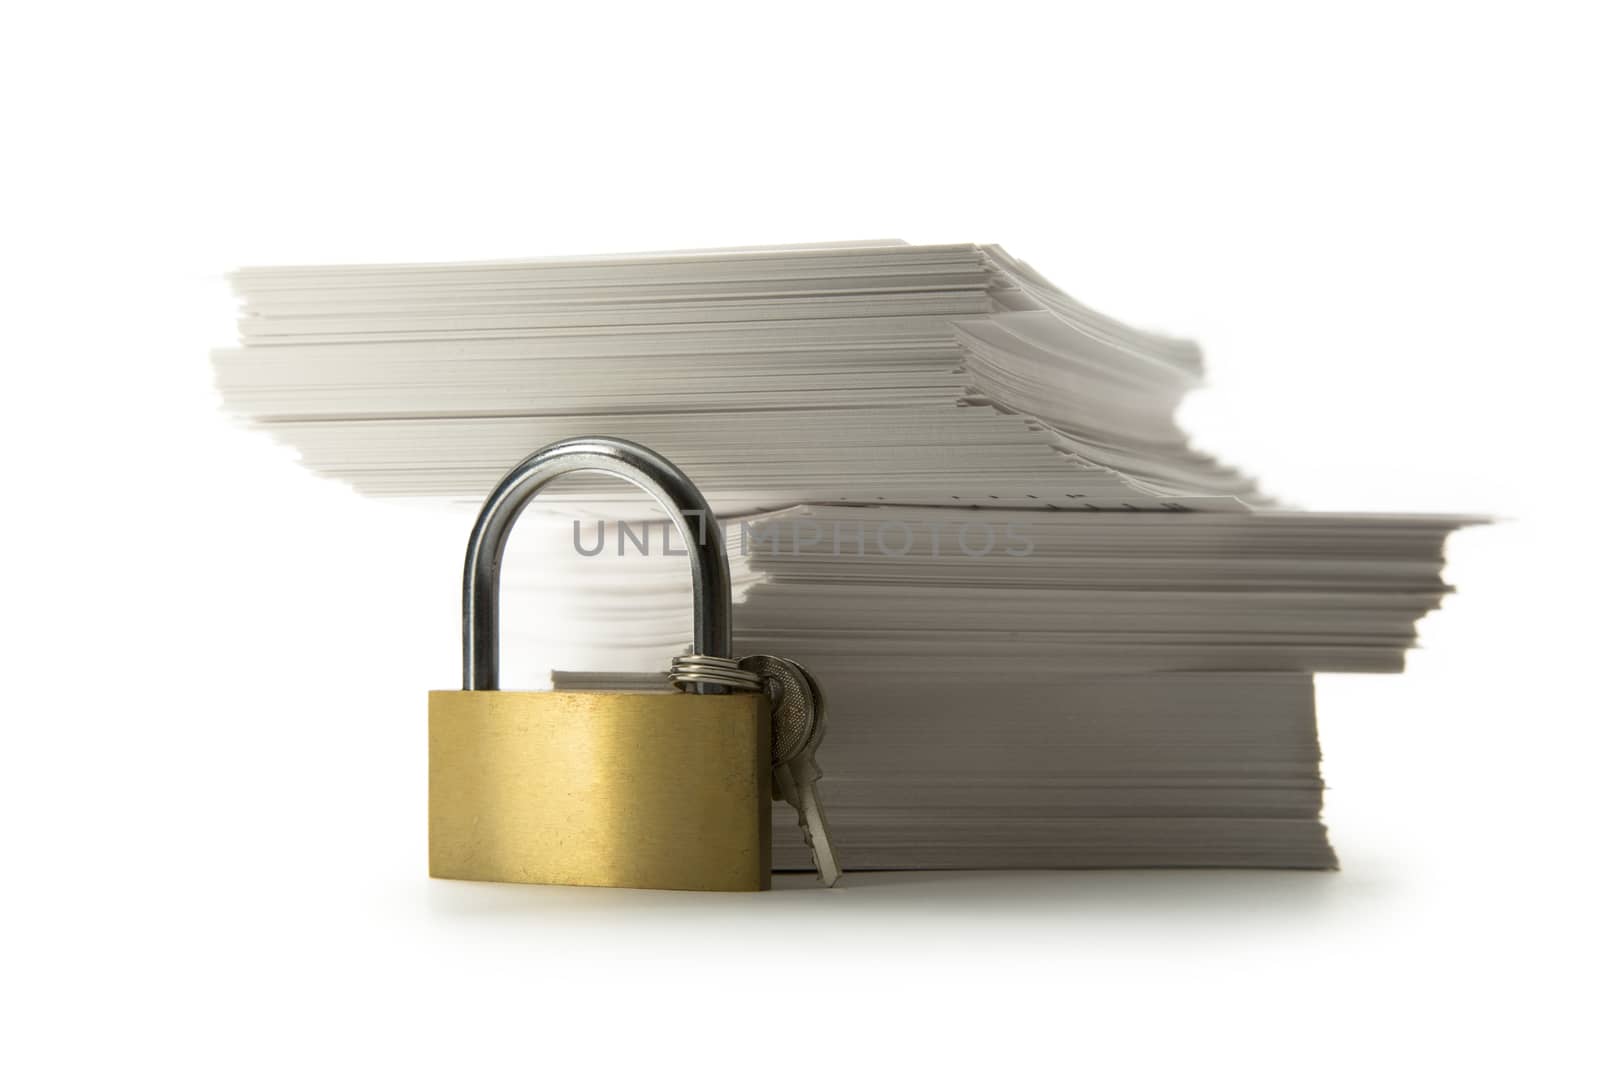 Stack of paper cards and keylock